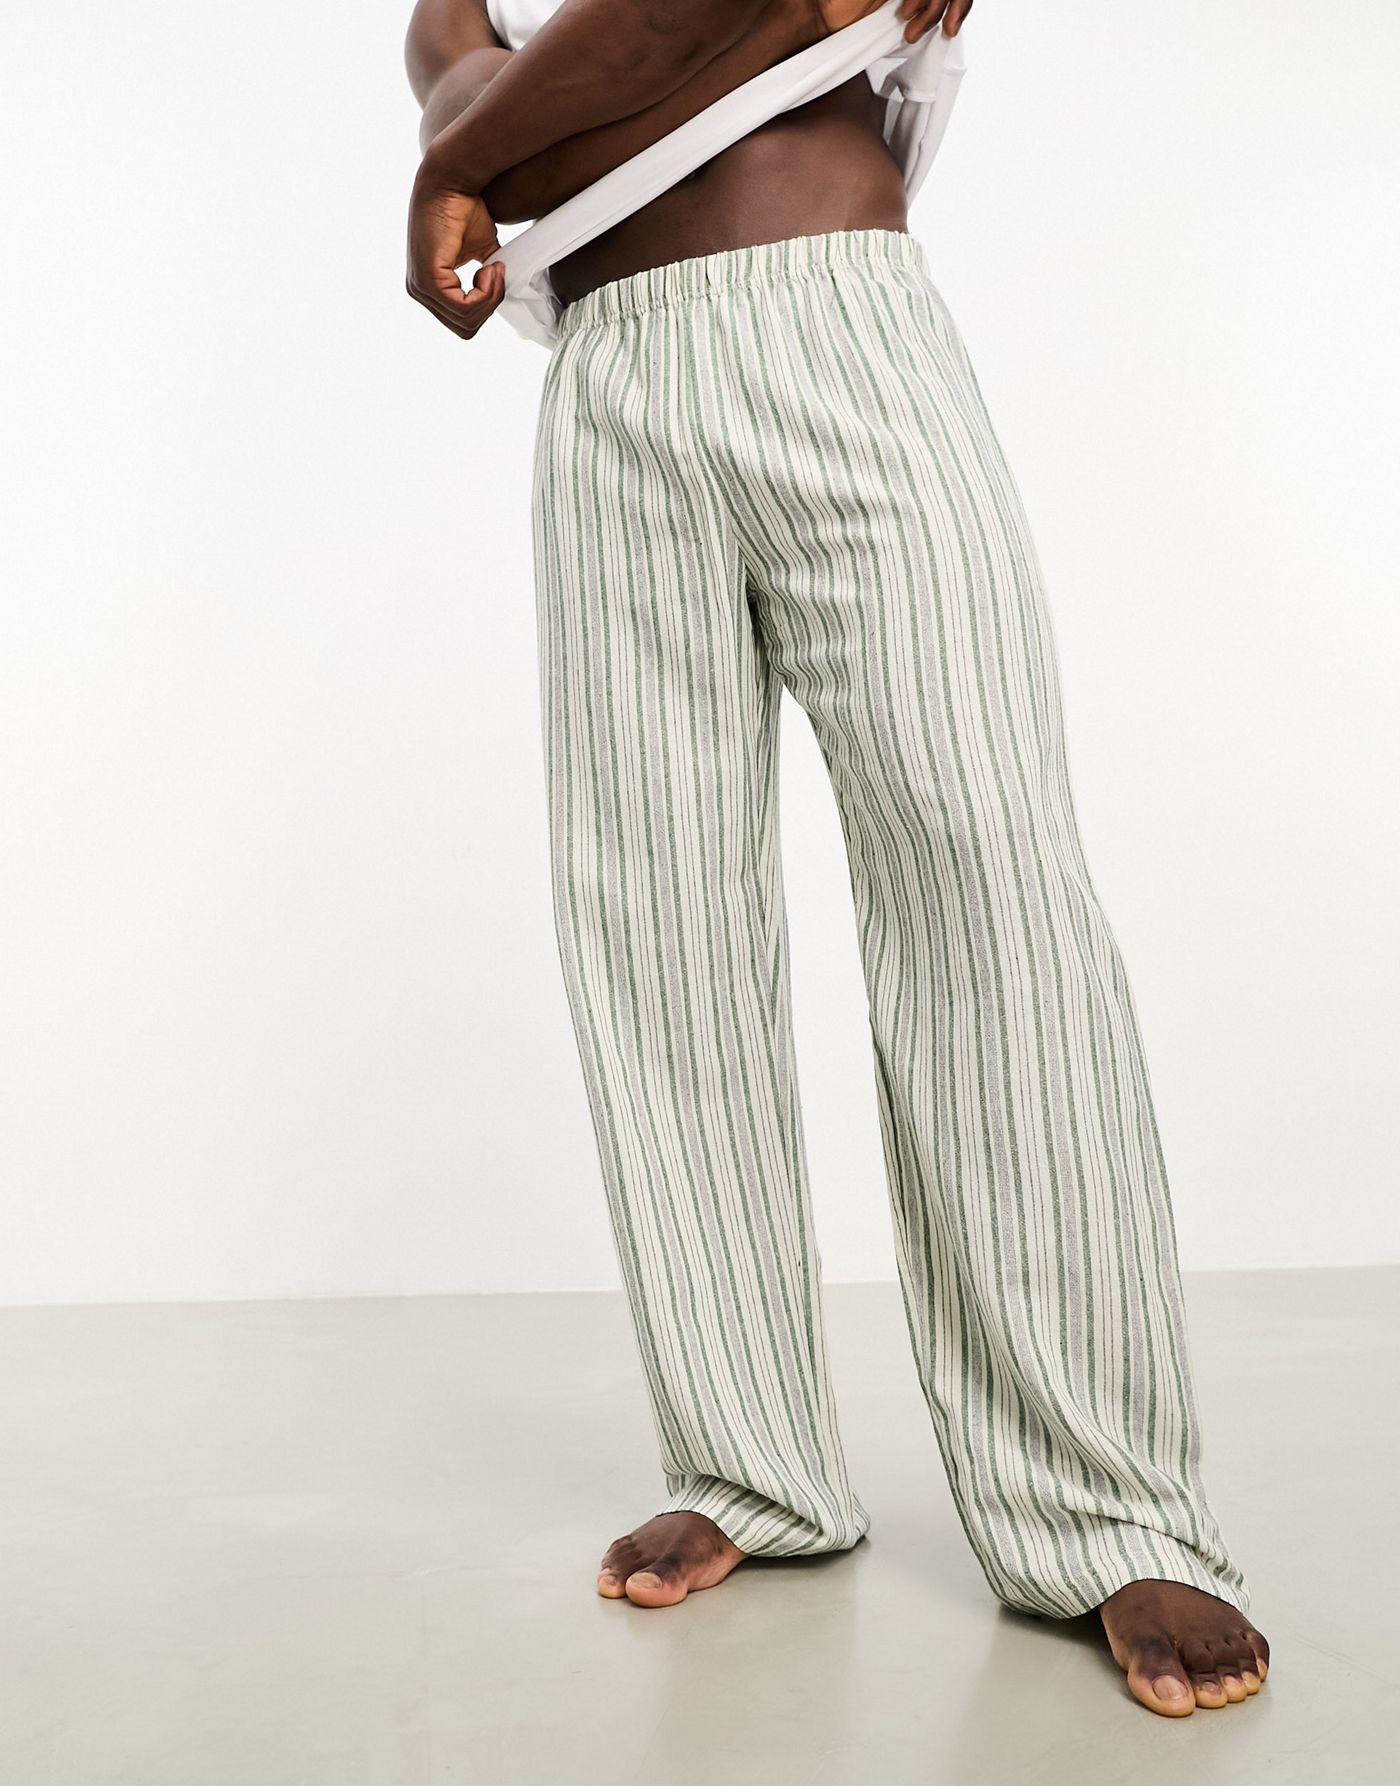 ASOS DESIGN lounge bottoms in textured stripe in beige and green